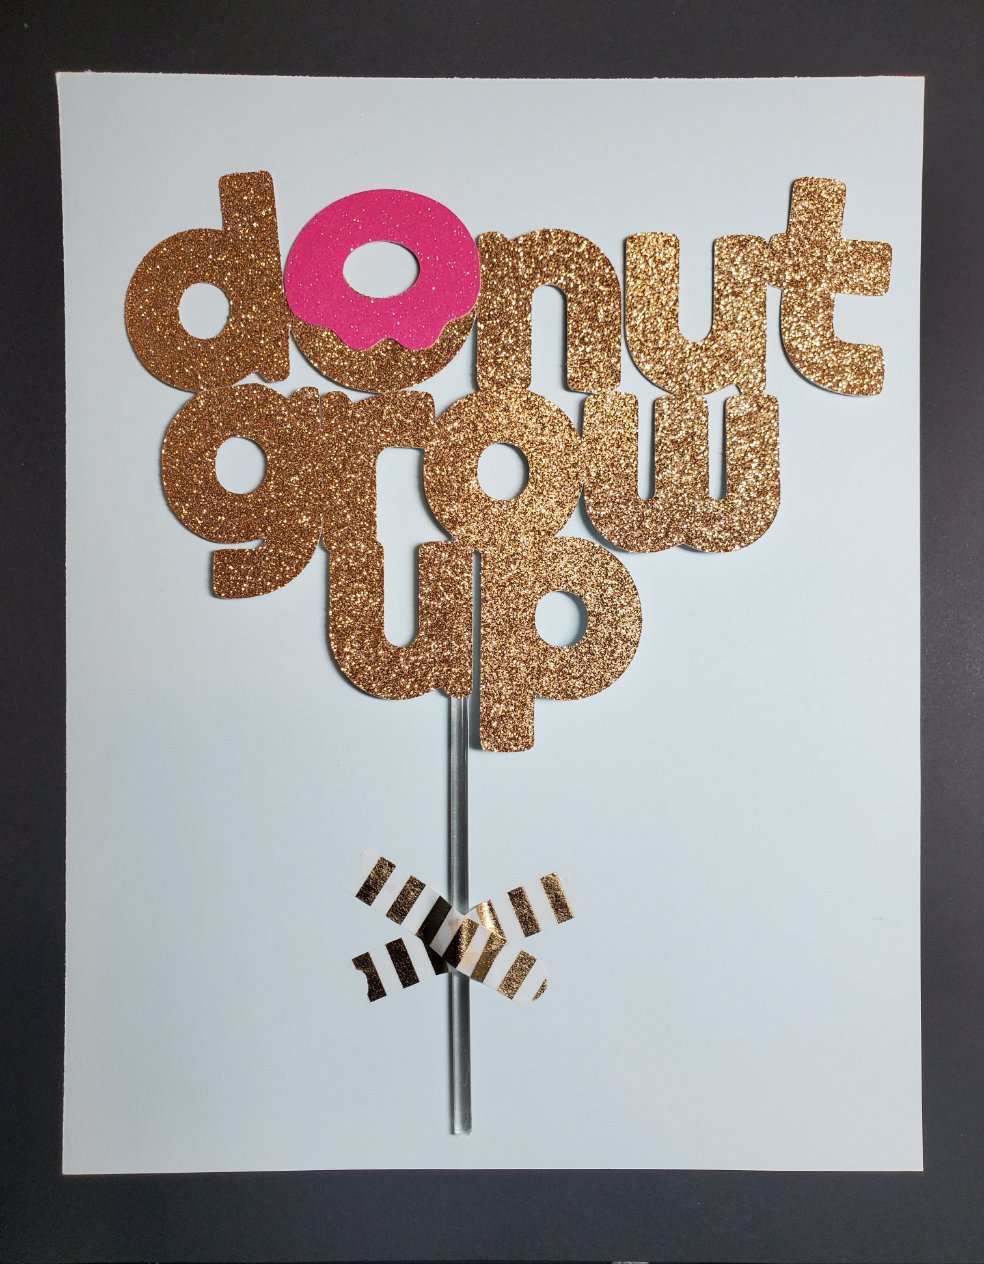 Donut Grow Up Cake Topper || Donut ||Sweets || Baby || Kid Birthday